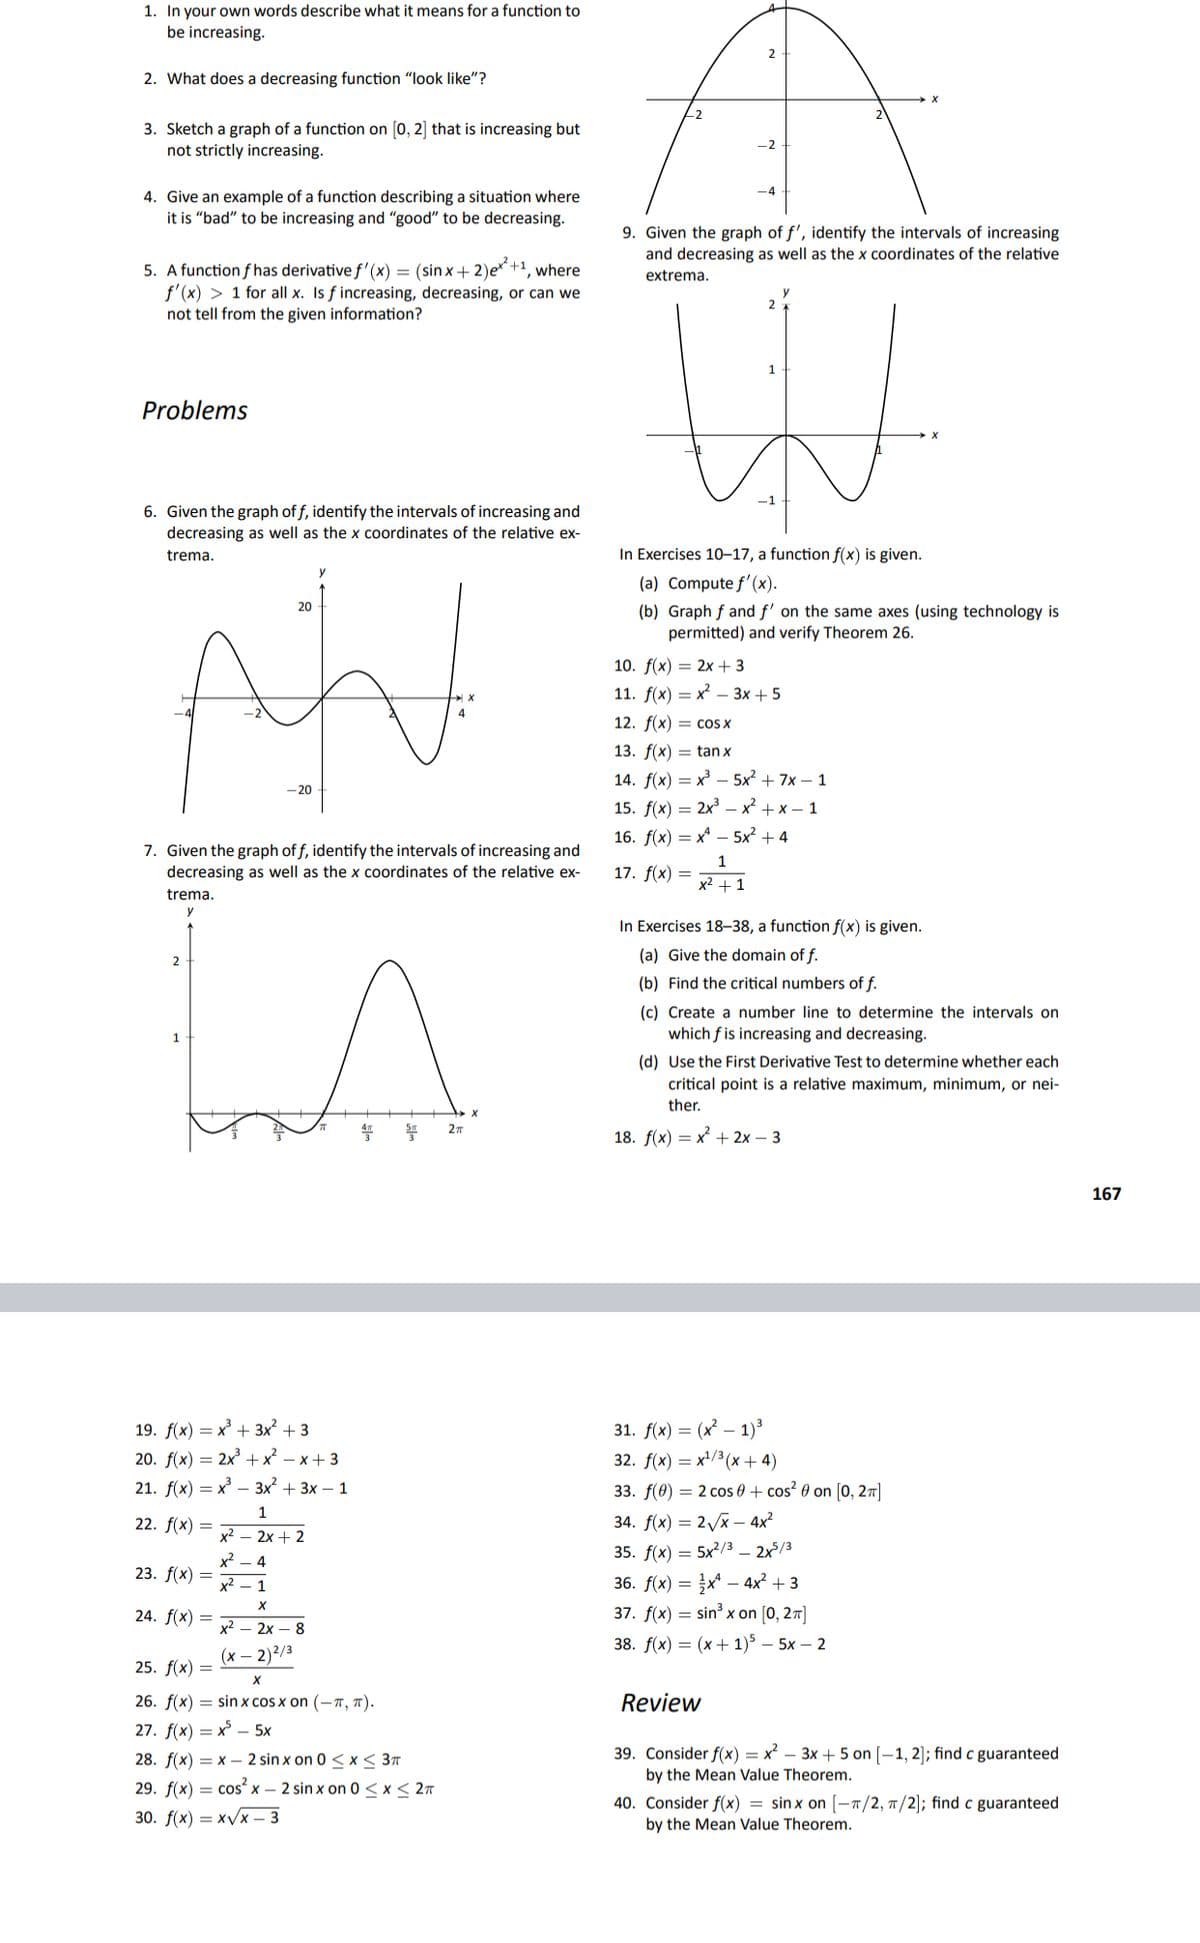 1. In your own words describe what it means for a function to
be increasing.
2
2. What does a decreasing function "look like"?
-2
3. Sketch a graph of a function on [0, 2] that is increasing but
not strictly increasing.
-2
4. Give an example of a function describing a situation where
it is "bad" to be increasing and "good" to be decreasing.
-4
9. Given the graph of f', identify the intervals of increasing
and decreasing as well as the x coordinates of the relative
5. A function f has derivative f' (x) = (sin x+ 2)e* +1, where
f'(x) > 1 for all x. Is f increasing, decreasing, or can we
not tell from the given information?
extrema.
Problems
6. Given the graph of f, identify the intervals of increasing and
decreasing as well as the x coordinates of the relative ex-
trema.
In Exercises 10–17, a function f(x) is given.
y
(a) Compute f'(x).
20
(b) Graph f and f' on the same axes (using technology is
permitted) and verify Theorem 26.
10. f(x) = 2x + 3
11. f(x) — х — 3х + 5
12. f(x) = cos X
13. f(x) = tan x
14. f(x) — х —5x + 7х— 1
- 20
15. f(x) = 2x – x + x – 1
16. f(x) — х — 5x? + 4
7. Given the graph of f, identify the intervals of increasing and
decreasing as well as the x coordinates of the relative ex-
1
17. f(x) =
x2 + 1
trema.
y
In Exercises 18–38, a function f(x) is given.
(a) Give the domain of f.
2
(b) Find the critical numbers of f.
(c) Create a number line to determine the intervals on
which f is increasing and decreasing.
1
(d) Use the First Derivative Test to determine whether each
critical point is a relative maximum, minimum, or nei-
ther.
27
18. f(x) = x + 2x – 3
167
19. f(x) = x + 3x² + 3
20. f(x) = 2x +x – x+ 3
31. f(x) = (x² – 1)³
32. f(x) = x'/³ (x + 4)
21. f(x) — х — 3x2 + 3х— 1
33. f(0) = 2 cos 0 + cos? 0 on [o, 27]
1
22. f(x) =
34. f(x) = 2/x – 4x²
x² – 2x + 2
x2 - 4
35. f(x) = 5x?/3 – 2x/3
23. f(x) =
36. f(x) = x* – 4x² + 3
37. f(x) = sin³ x on [0, 27]
x2 – 1
24. f(x)
x²
2х— 8
38. f(x) 3 (х + 1)5 — 5х — 2
(x – 2)2/3
25. f(x) =
26. f(x) = sin x cos x on (-T, T).
Review
27. f(x) = x° – 5x
39. Consider f(x) = x² – 3x + 5 on [–1, 2]; findc guaranteed
by the Mean Value Theorem.
28. f(x) = x – 2 sin x on 0 < x < 3T
29. f(x) = cos² x – 2 sin x on 0 < x< 27
30. f(х) — х/x - 3
40. Consider f(x) = sinx on [-T/2, 7/2]; find c guaranteed
by the Mean Value Theorem.
